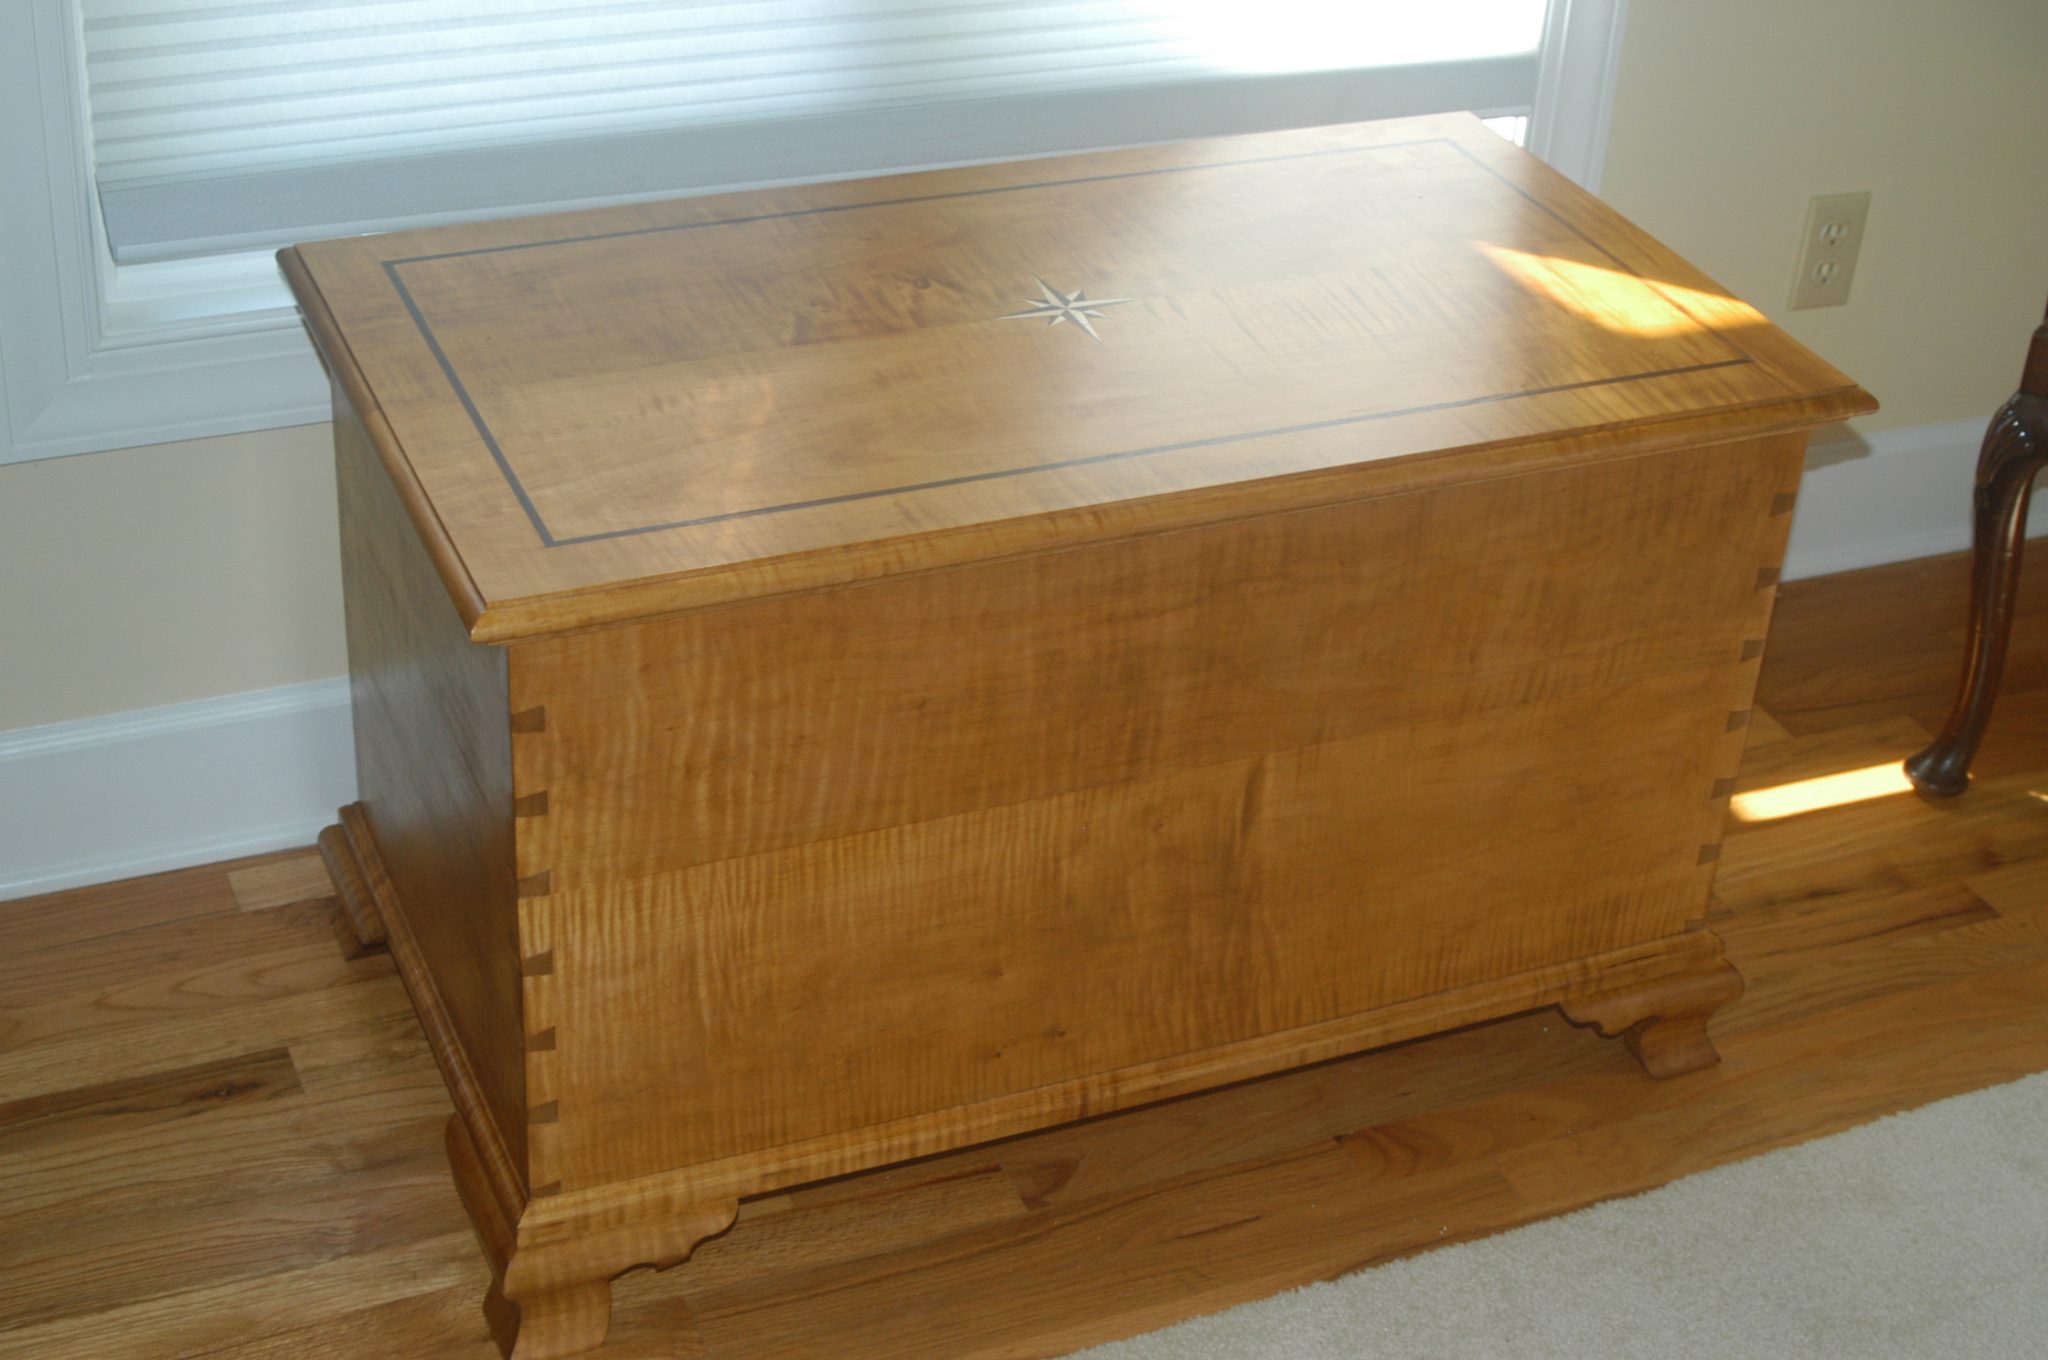 Tiger Maple Blanket Chest, Cedar lined with Compass and Border Inlay in Top and Ogee Feet